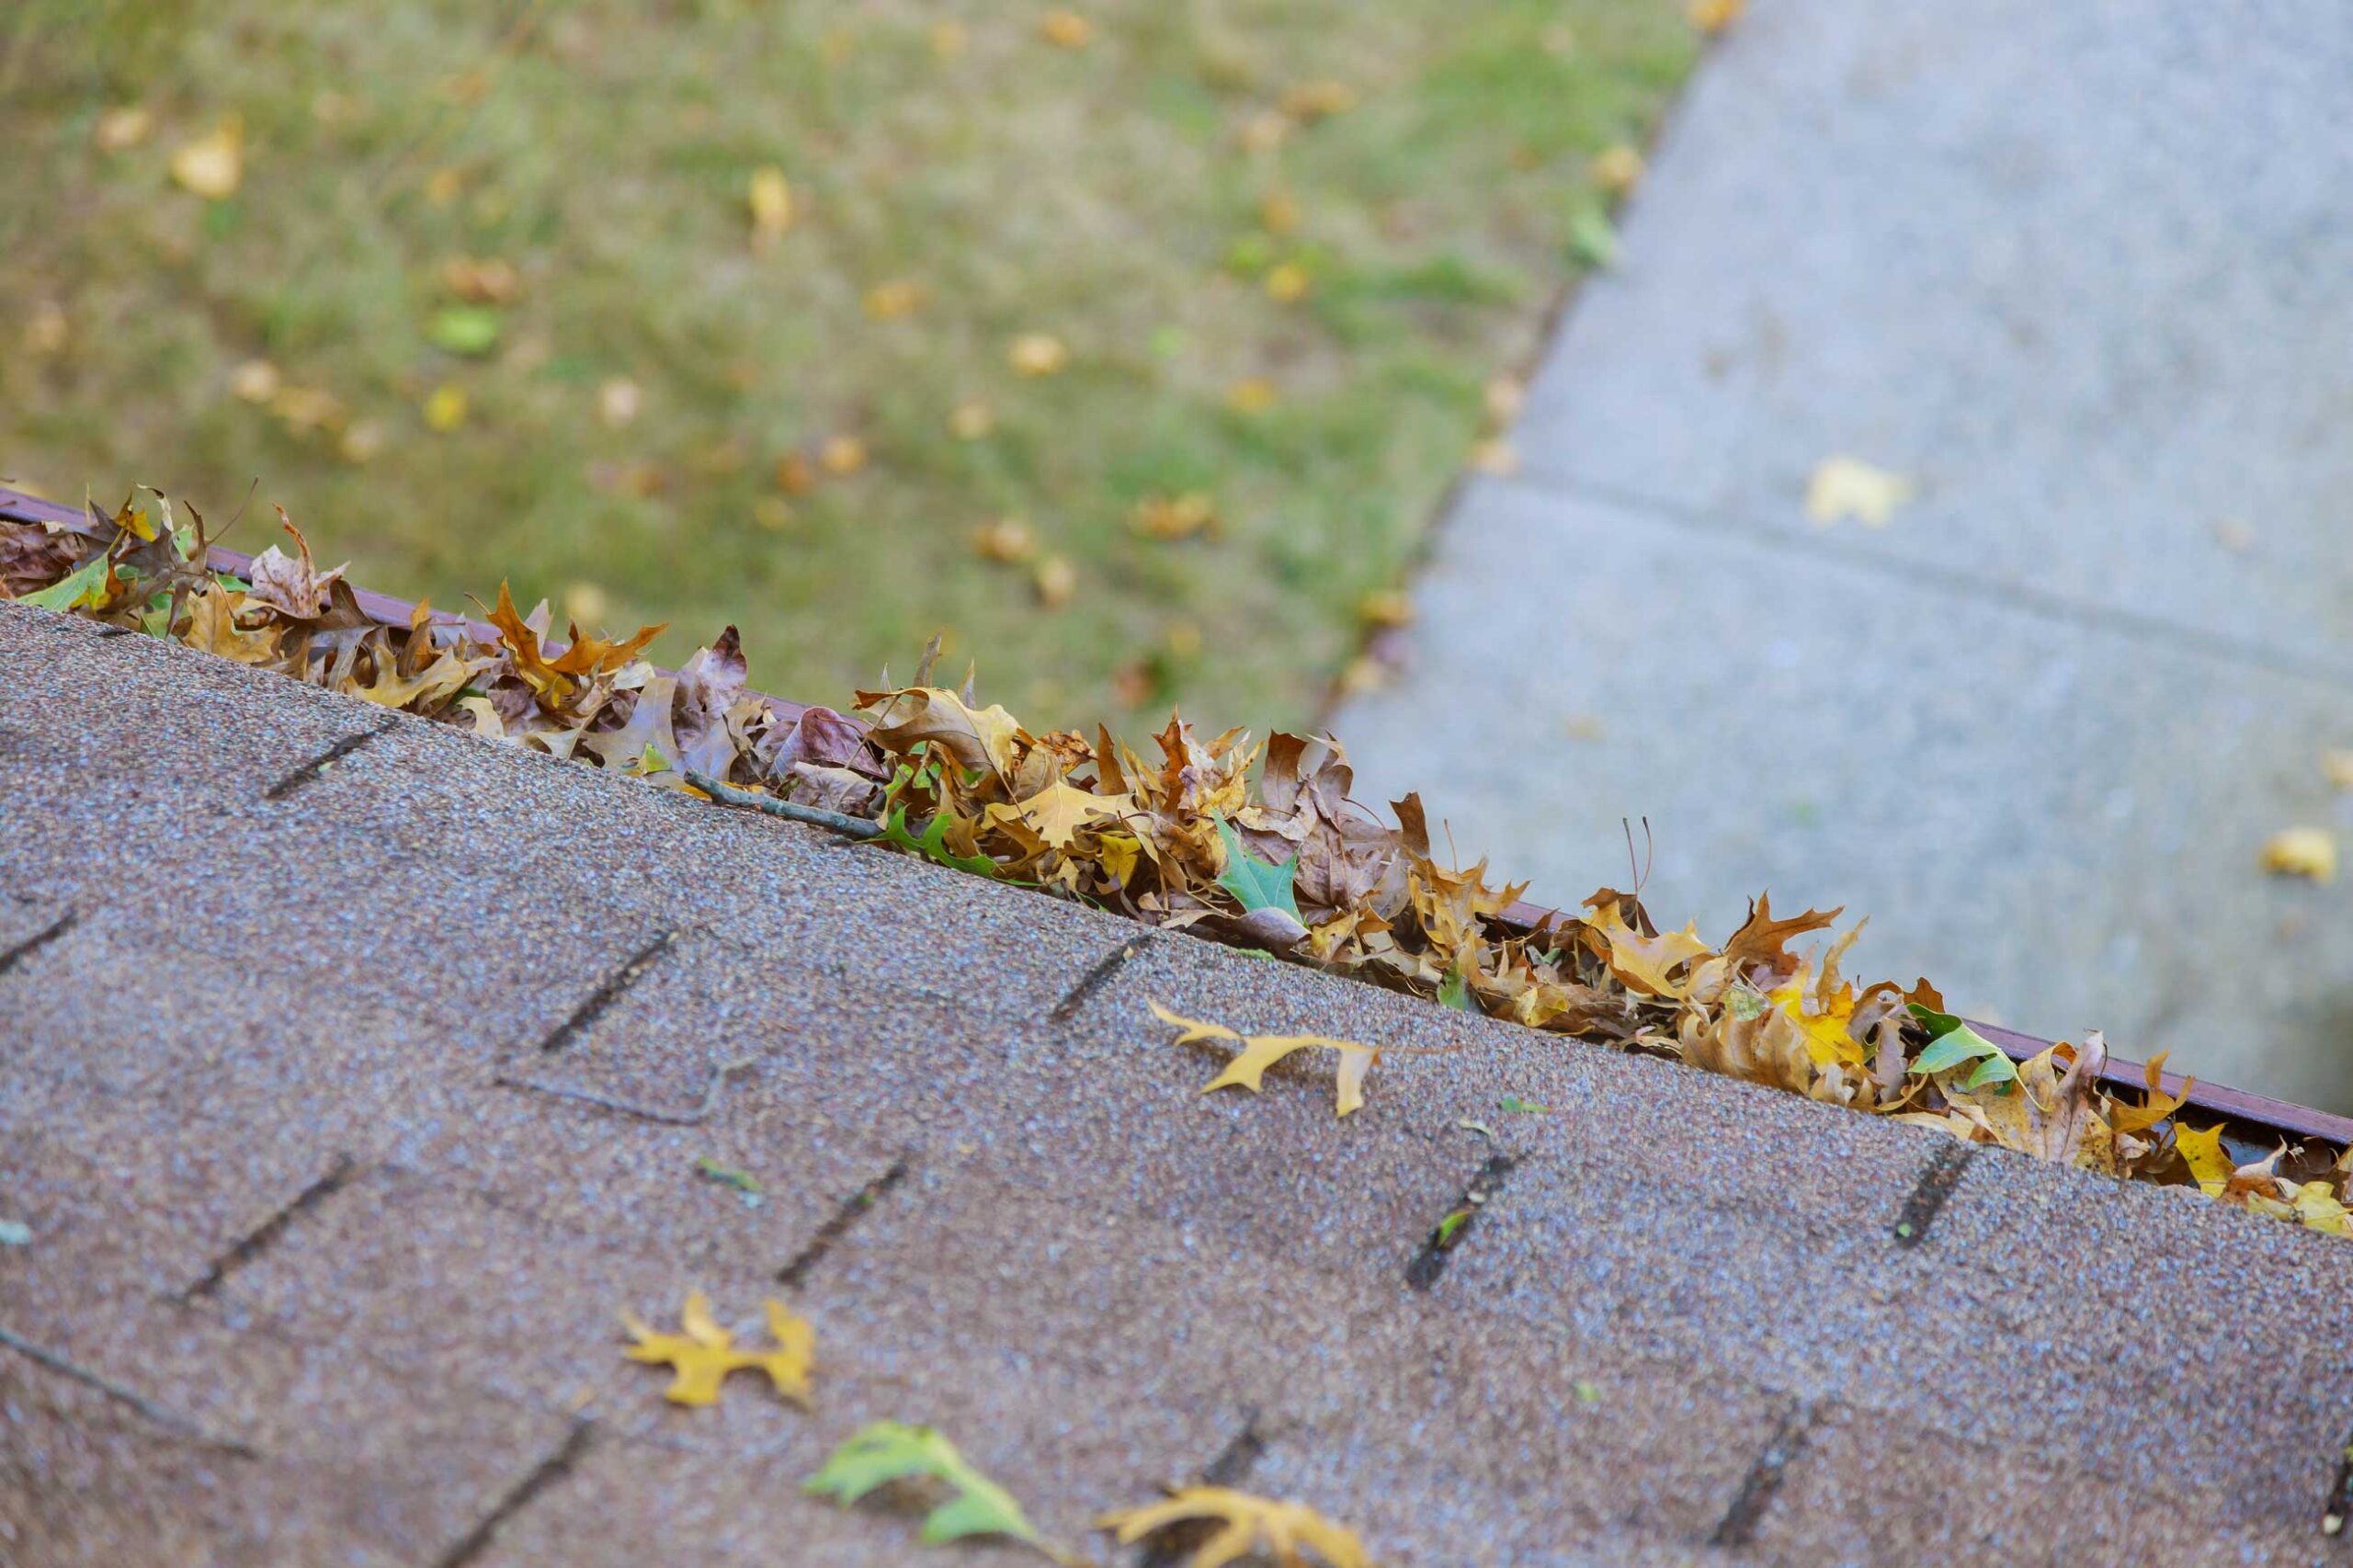 An angled view of a roof with asphalt shingles and a clogged gutter full of fallen leaves, highlighting the need for cleaning against an autumnal backdrop with scattered leaves on the ground.